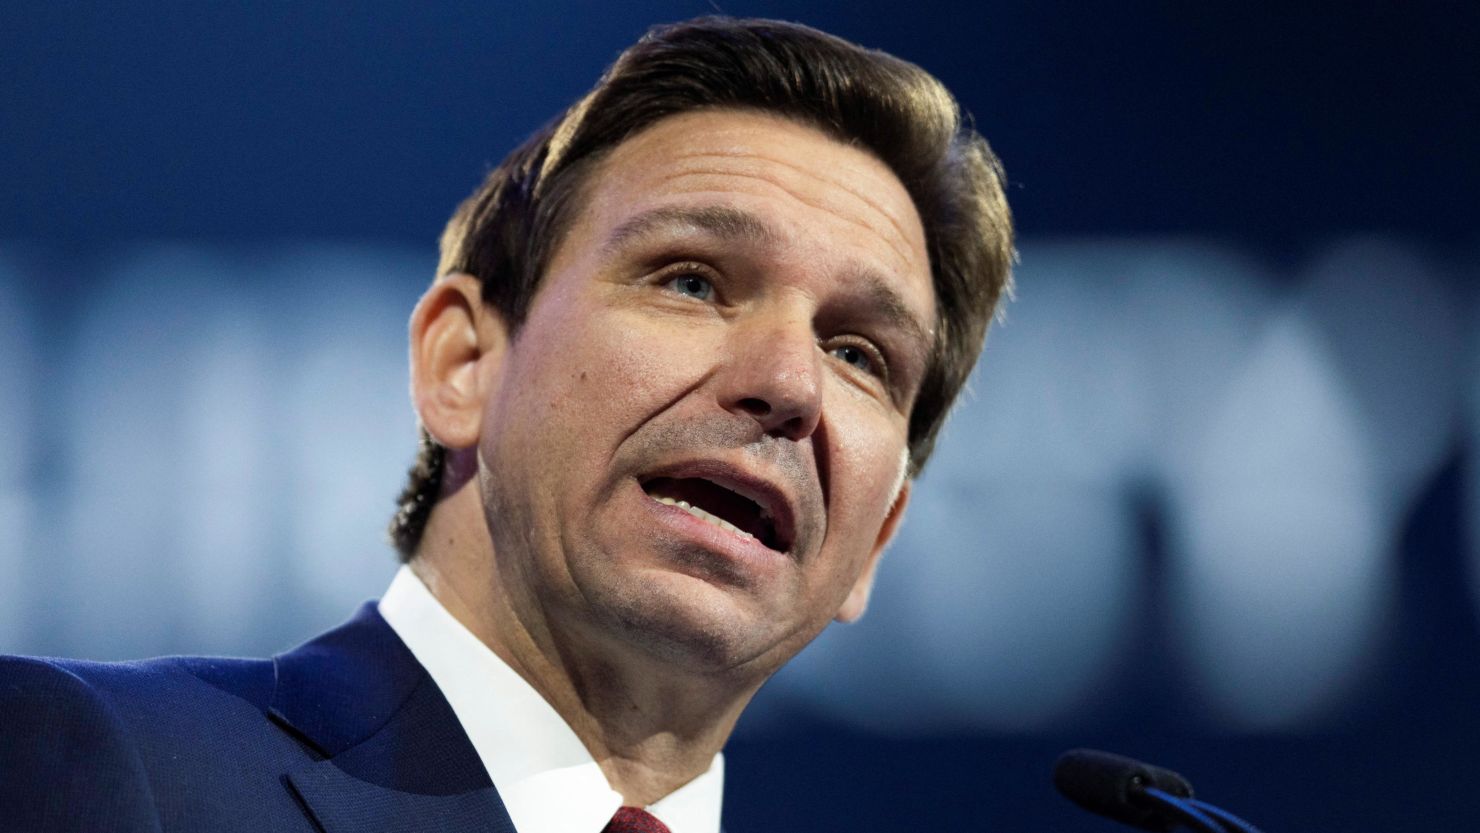 Florida Gov. Ron DeSantis addresses a university convocation at Liberty University, founded by Baptist minister Jerry Falwell Sr. as "an accredited Christian university for evangelical believers," in Lynchburg, Virginia, on April 14, 2023.